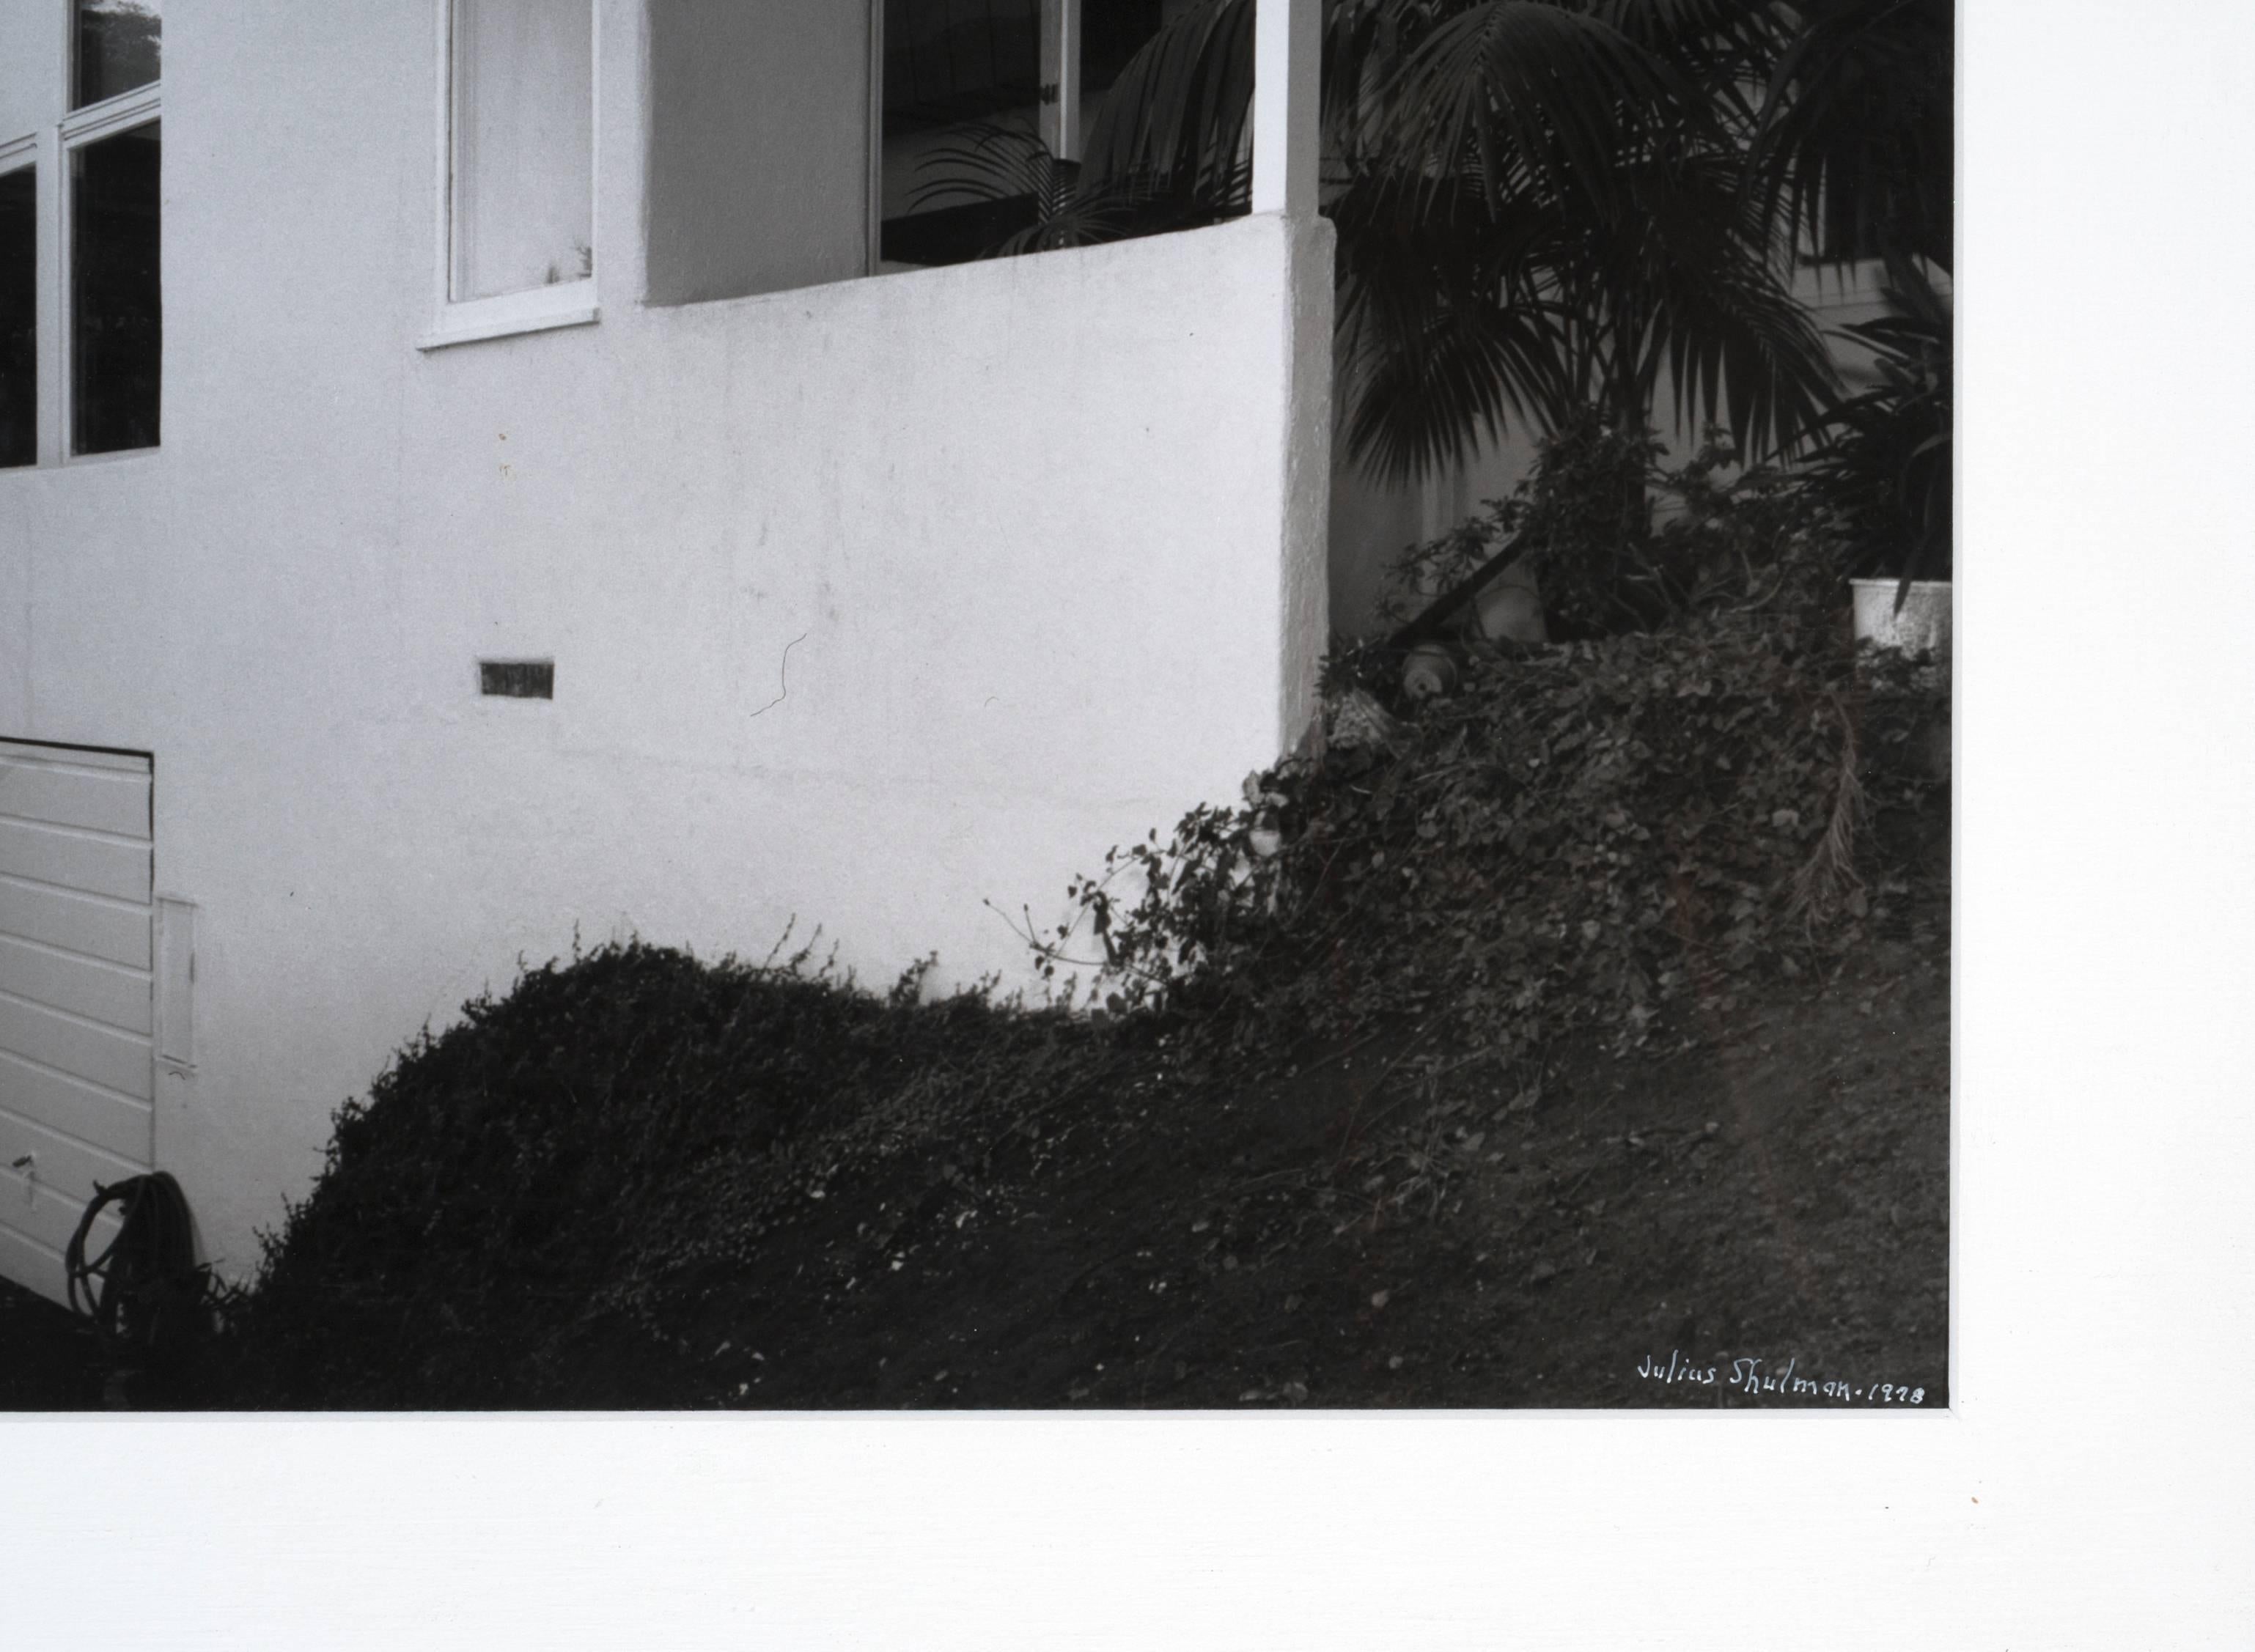 American Julius Shulman B & W Photograph of the Droste House by R.M. Schindler